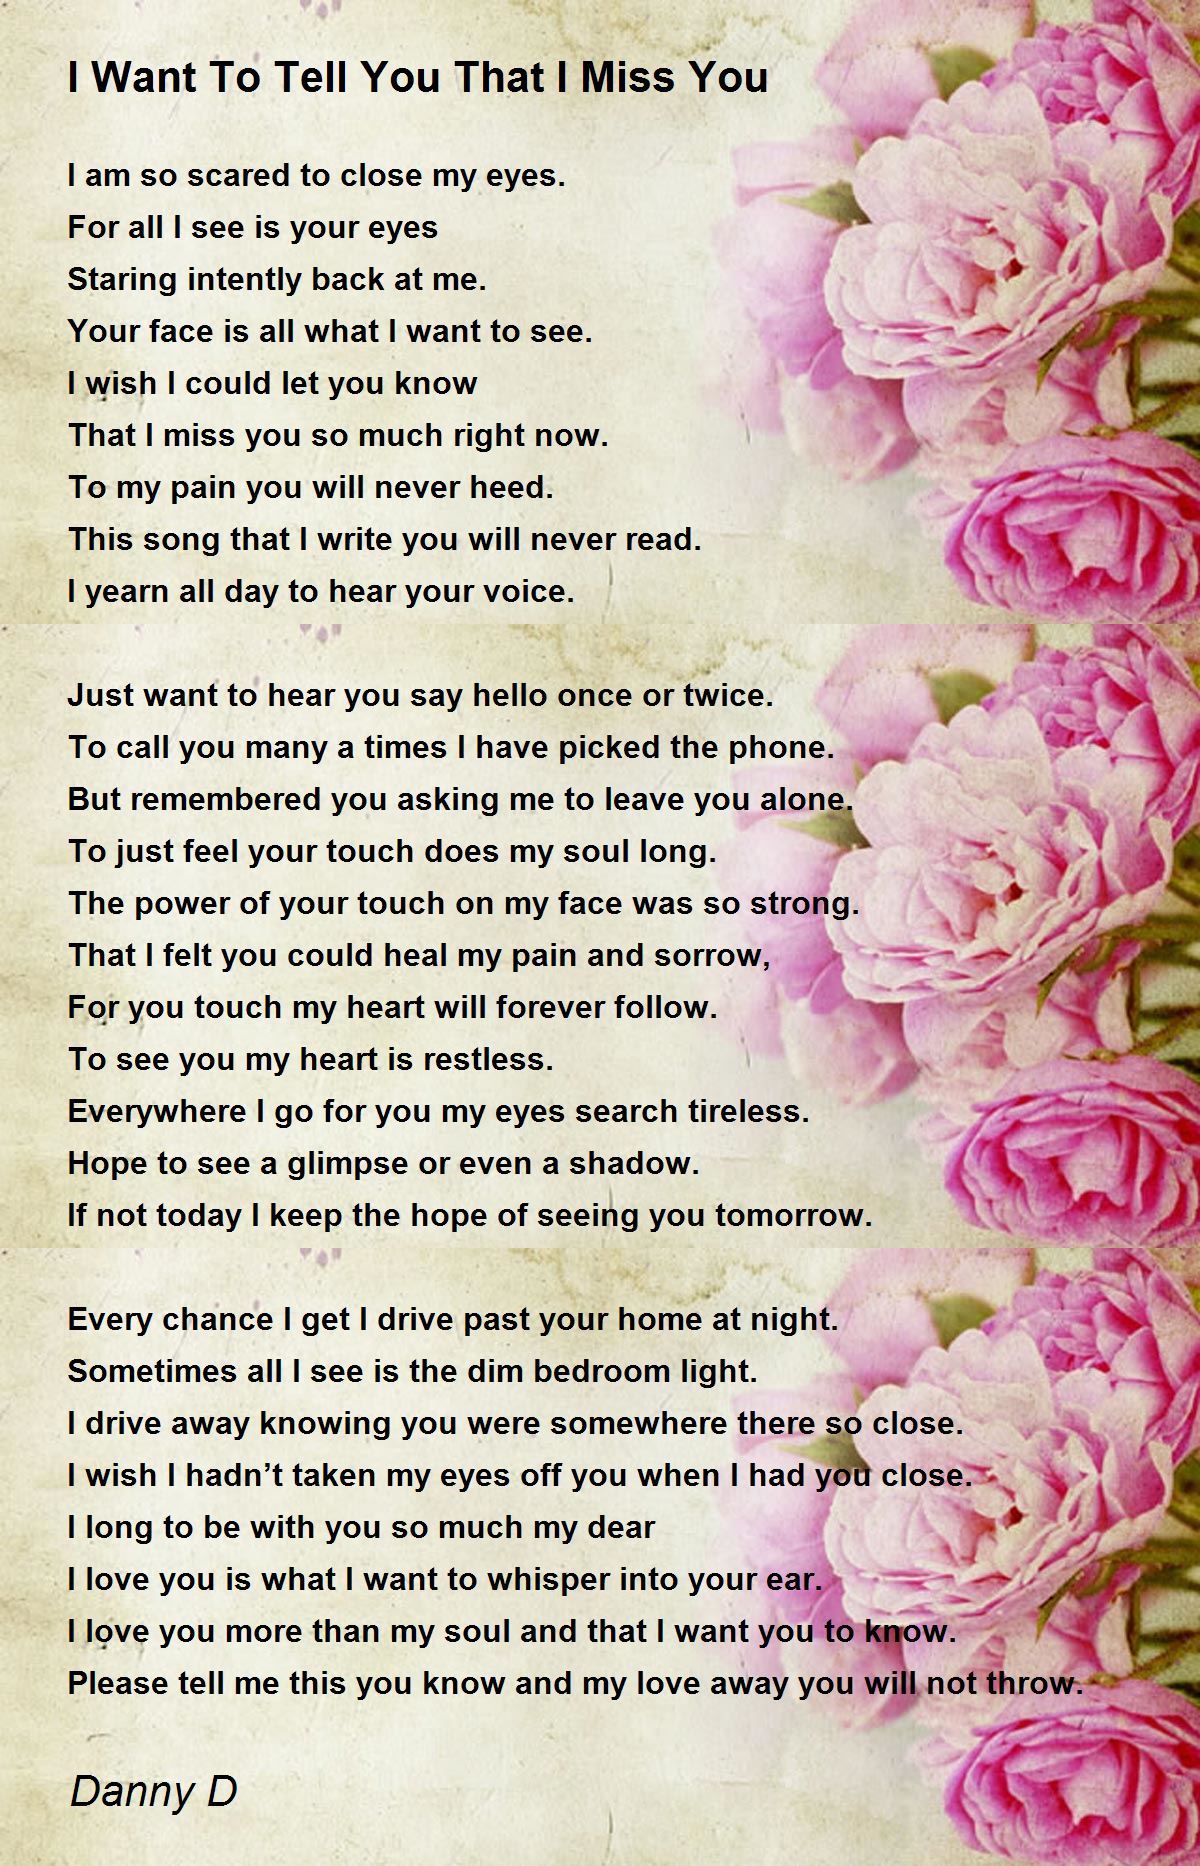 You Are The Sweetest Thing - You Are The Sweetest Thing Poem by Danny D